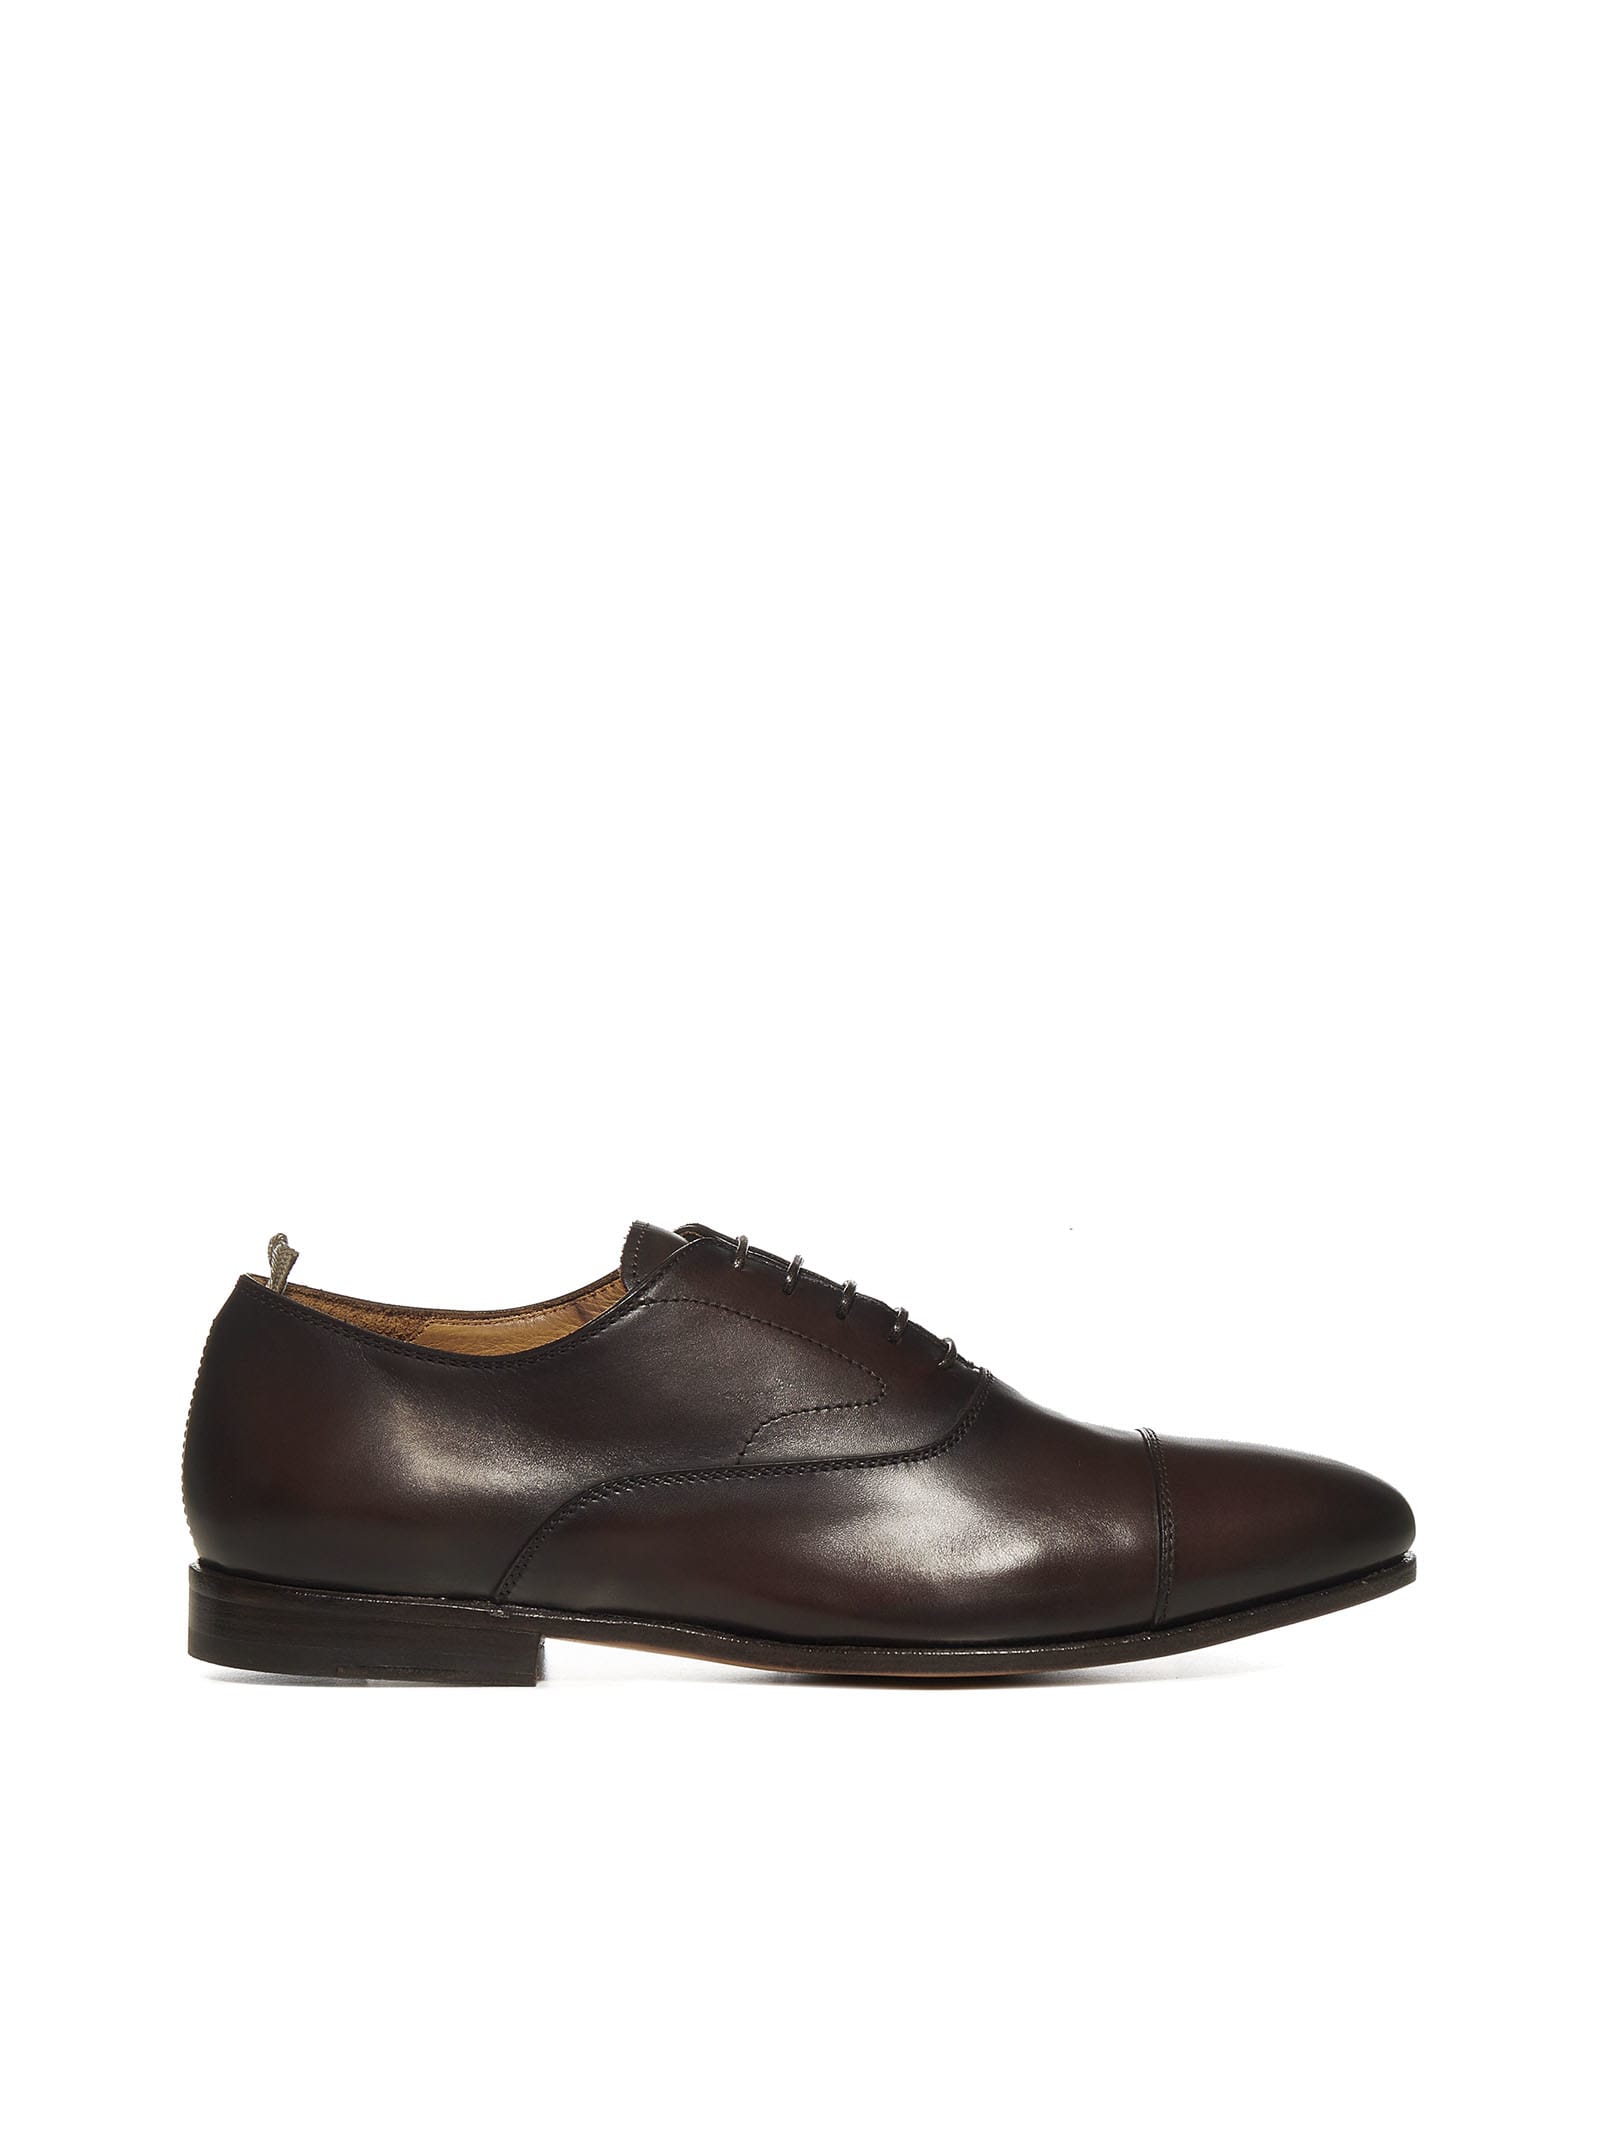 Officine Creative Revien 207 Airbrushed Leather Oxford Shoes